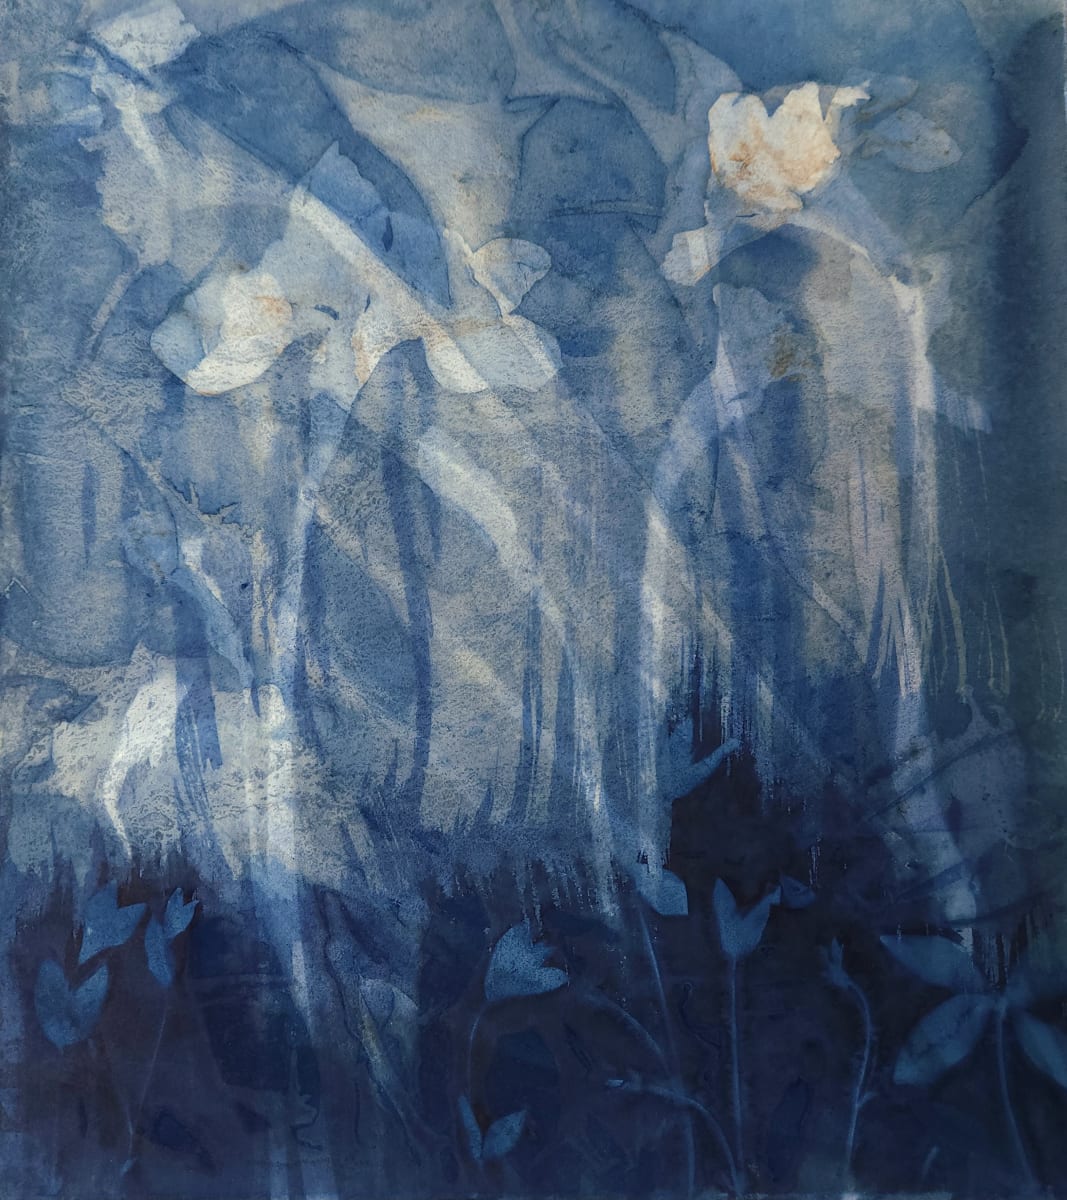 Tulip and Chickweed I by Madge Evers  Image: Multi-layered cyanotype. First Tulip layer made at Oak Spring Garden Foundation. Second layer made with chickweed from my garden. 